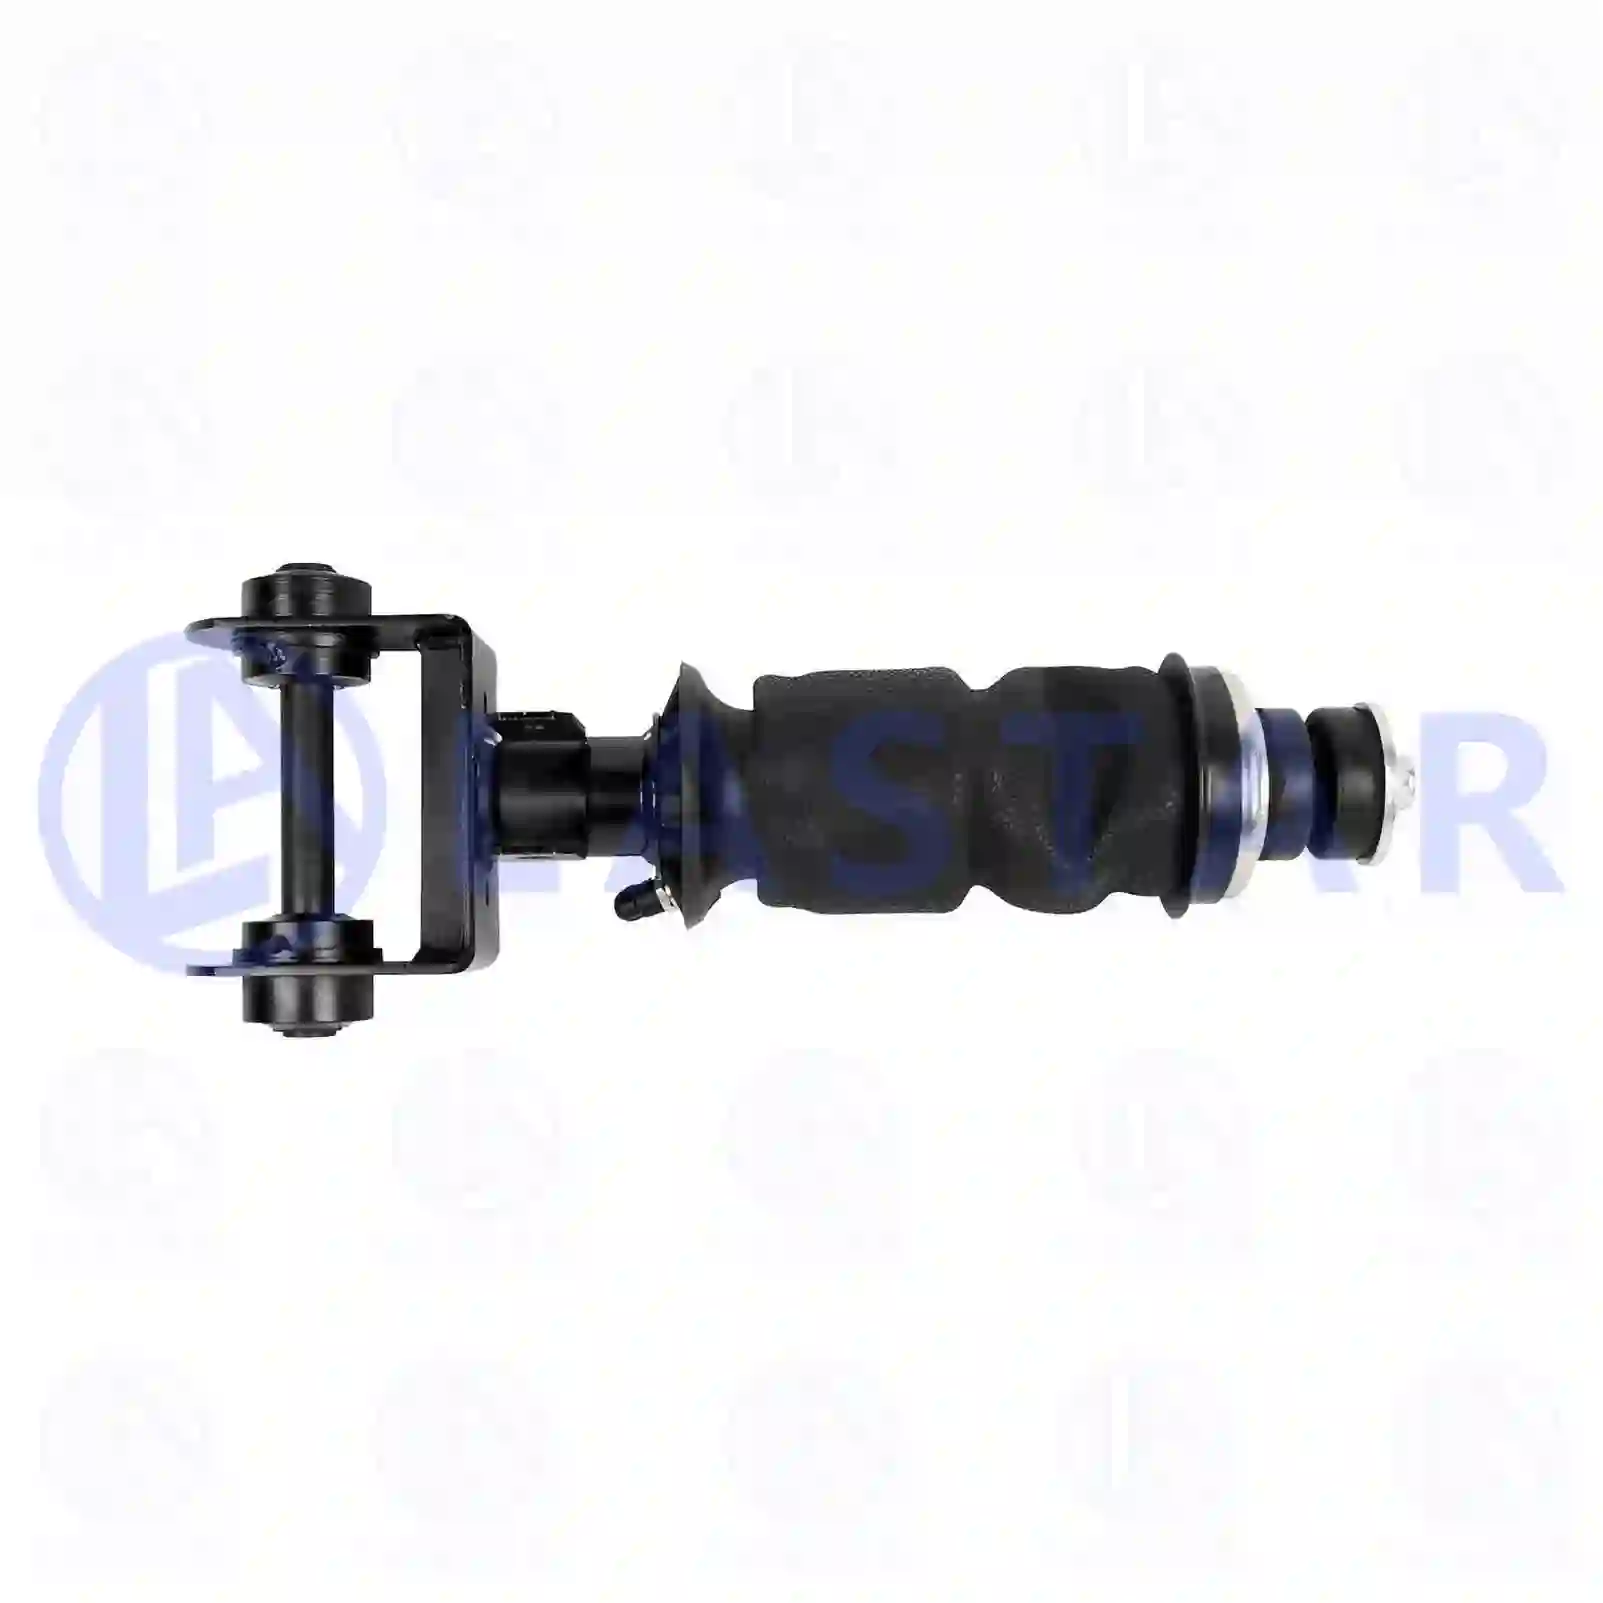 Cabin shock absorber, with air bellow, 77734780, 5010552241, 7420898055, 7482052893, 20591650, 82052893, ZG41221-0008 ||  77734780 Lastar Spare Part | Truck Spare Parts, Auotomotive Spare Parts Cabin shock absorber, with air bellow, 77734780, 5010552241, 7420898055, 7482052893, 20591650, 82052893, ZG41221-0008 ||  77734780 Lastar Spare Part | Truck Spare Parts, Auotomotive Spare Parts